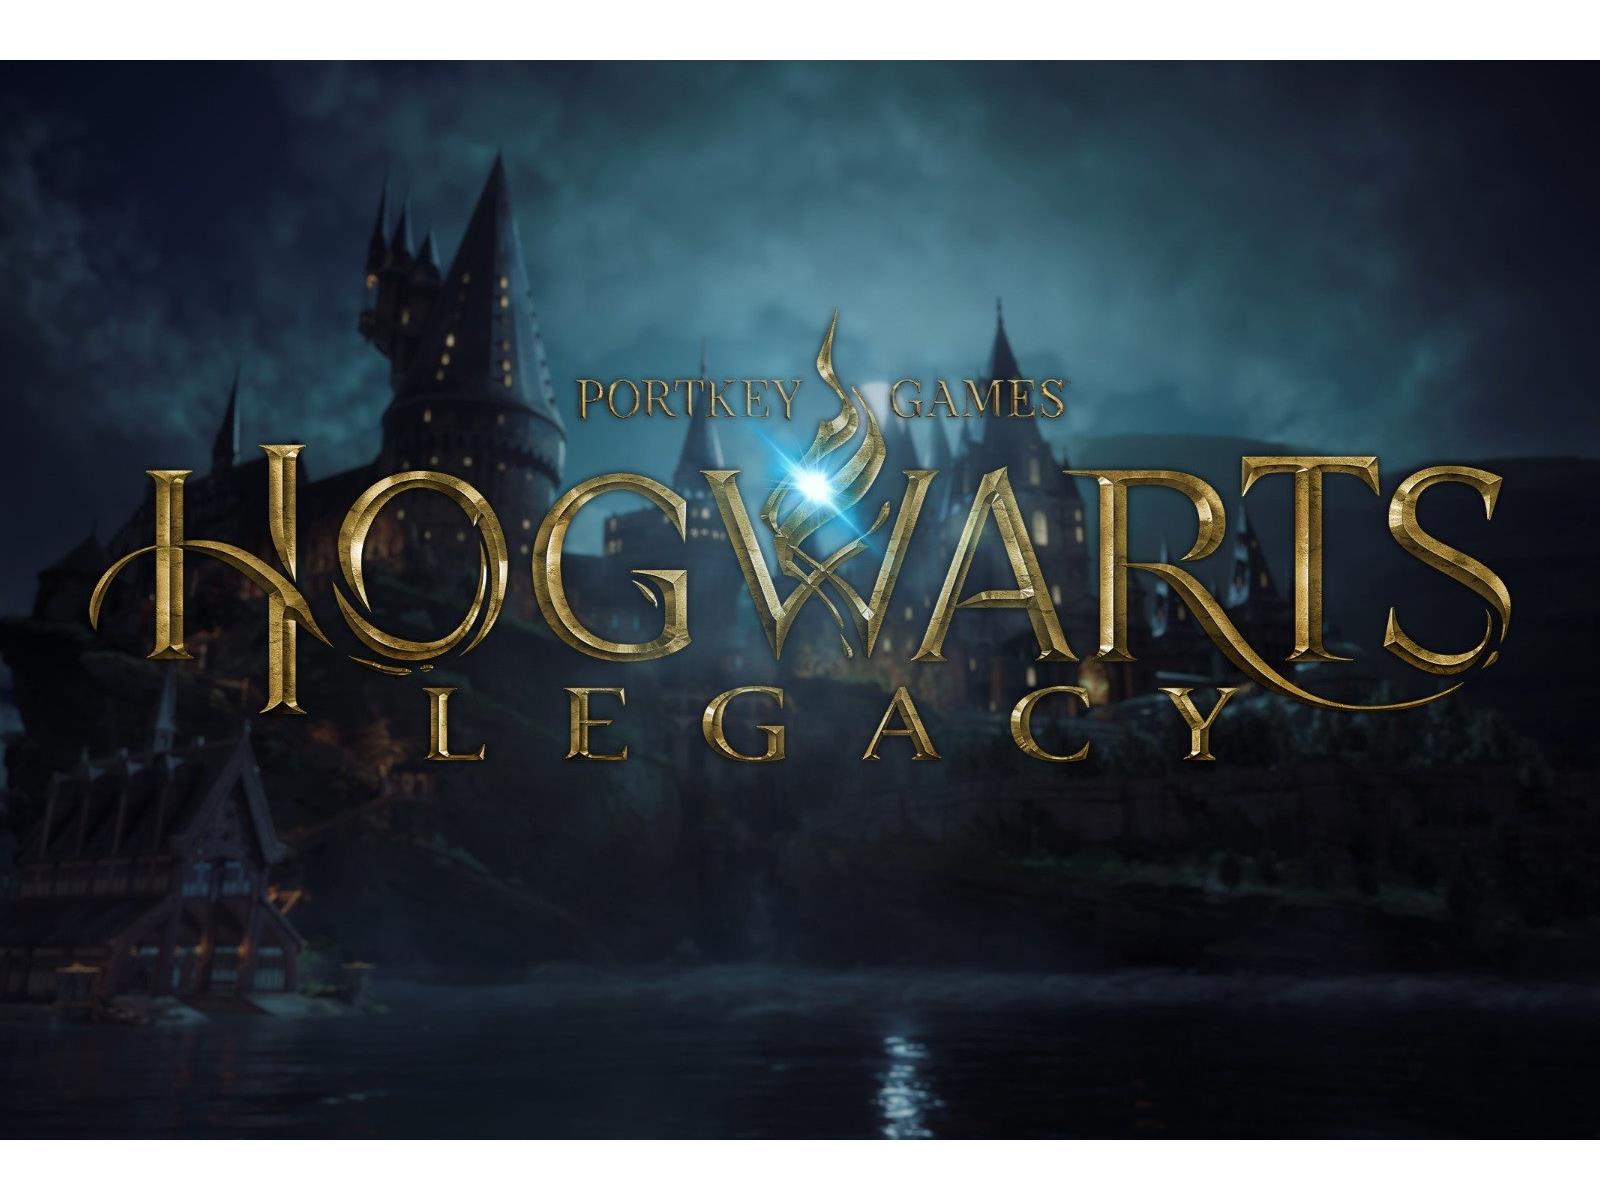 Hogwarts Legacy PS4 delay suggests PS5 era is truly getting started